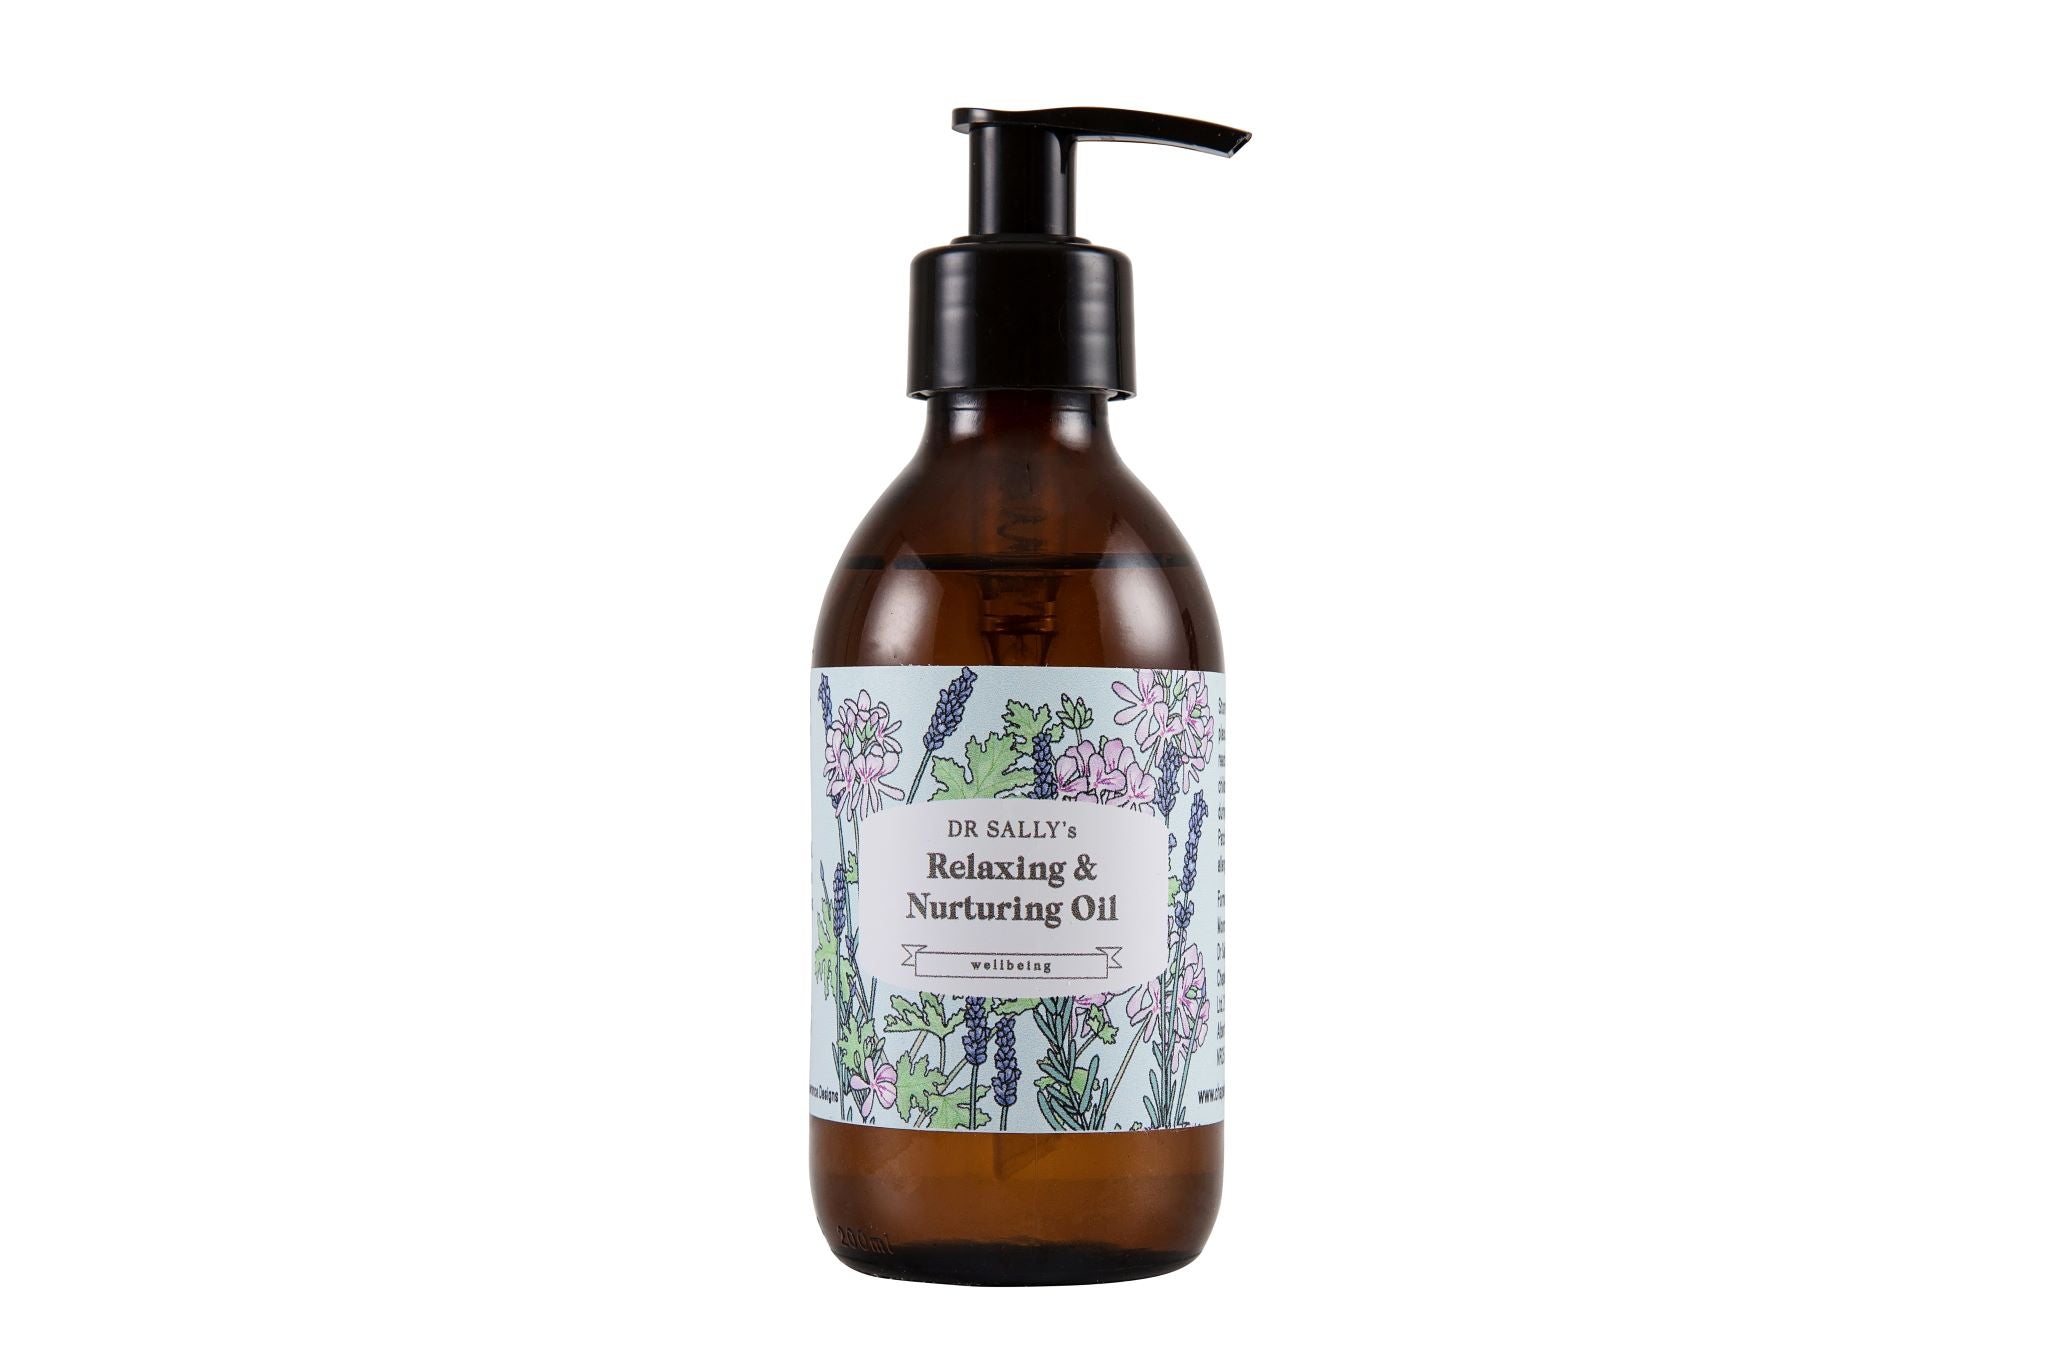 Dr Sally's Relaxing & Nurturing Oil